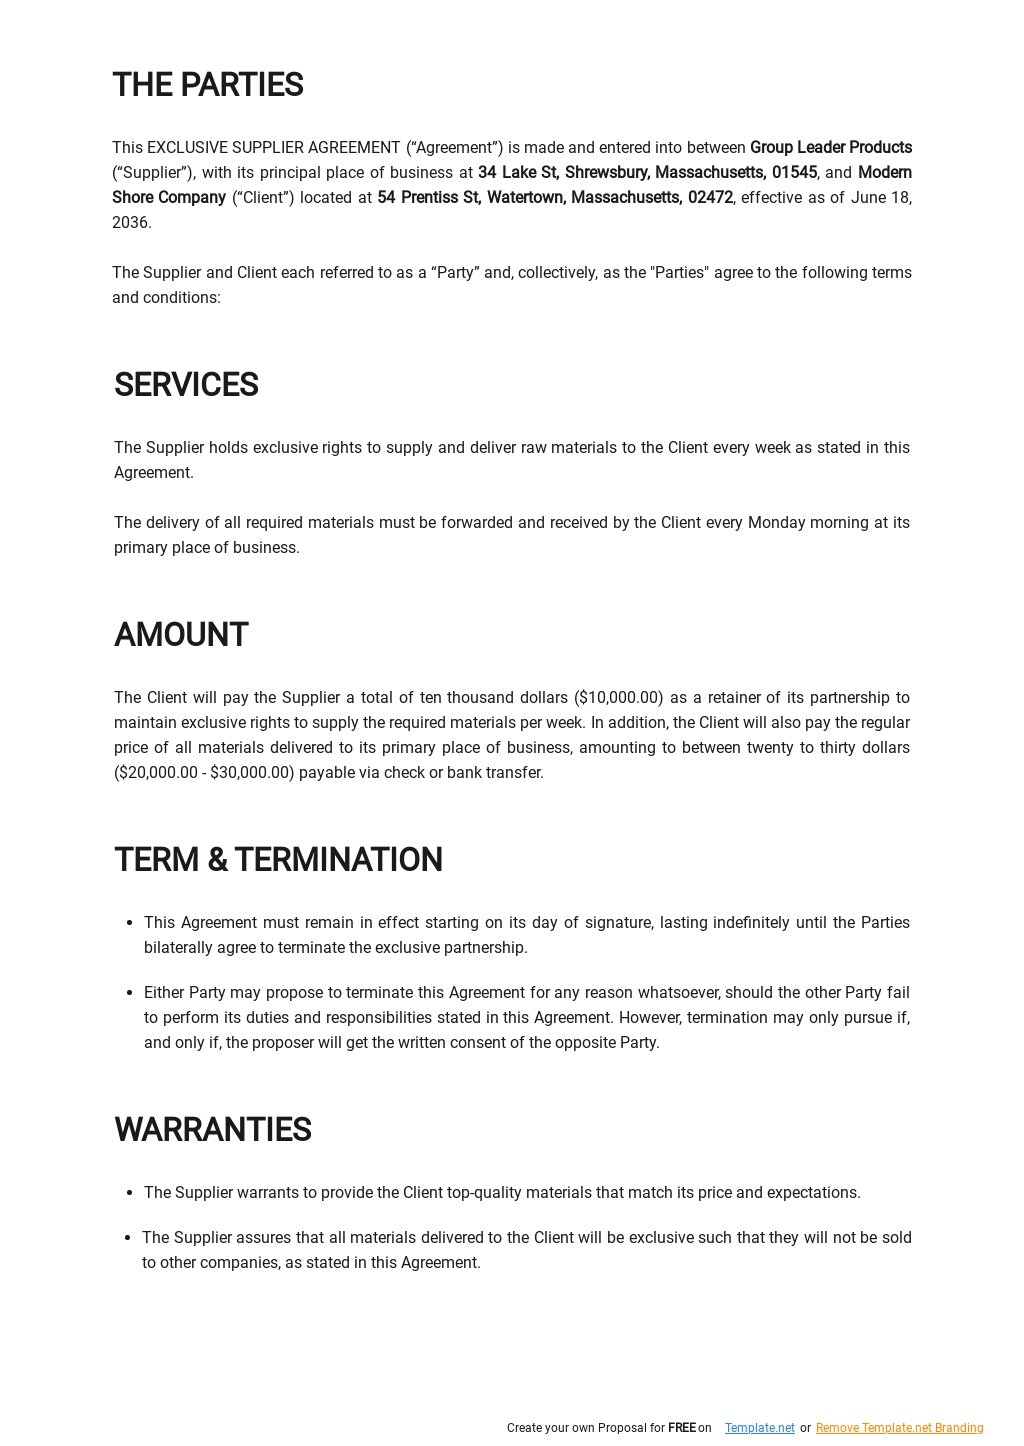 Exclusive Supplier Agreement Template